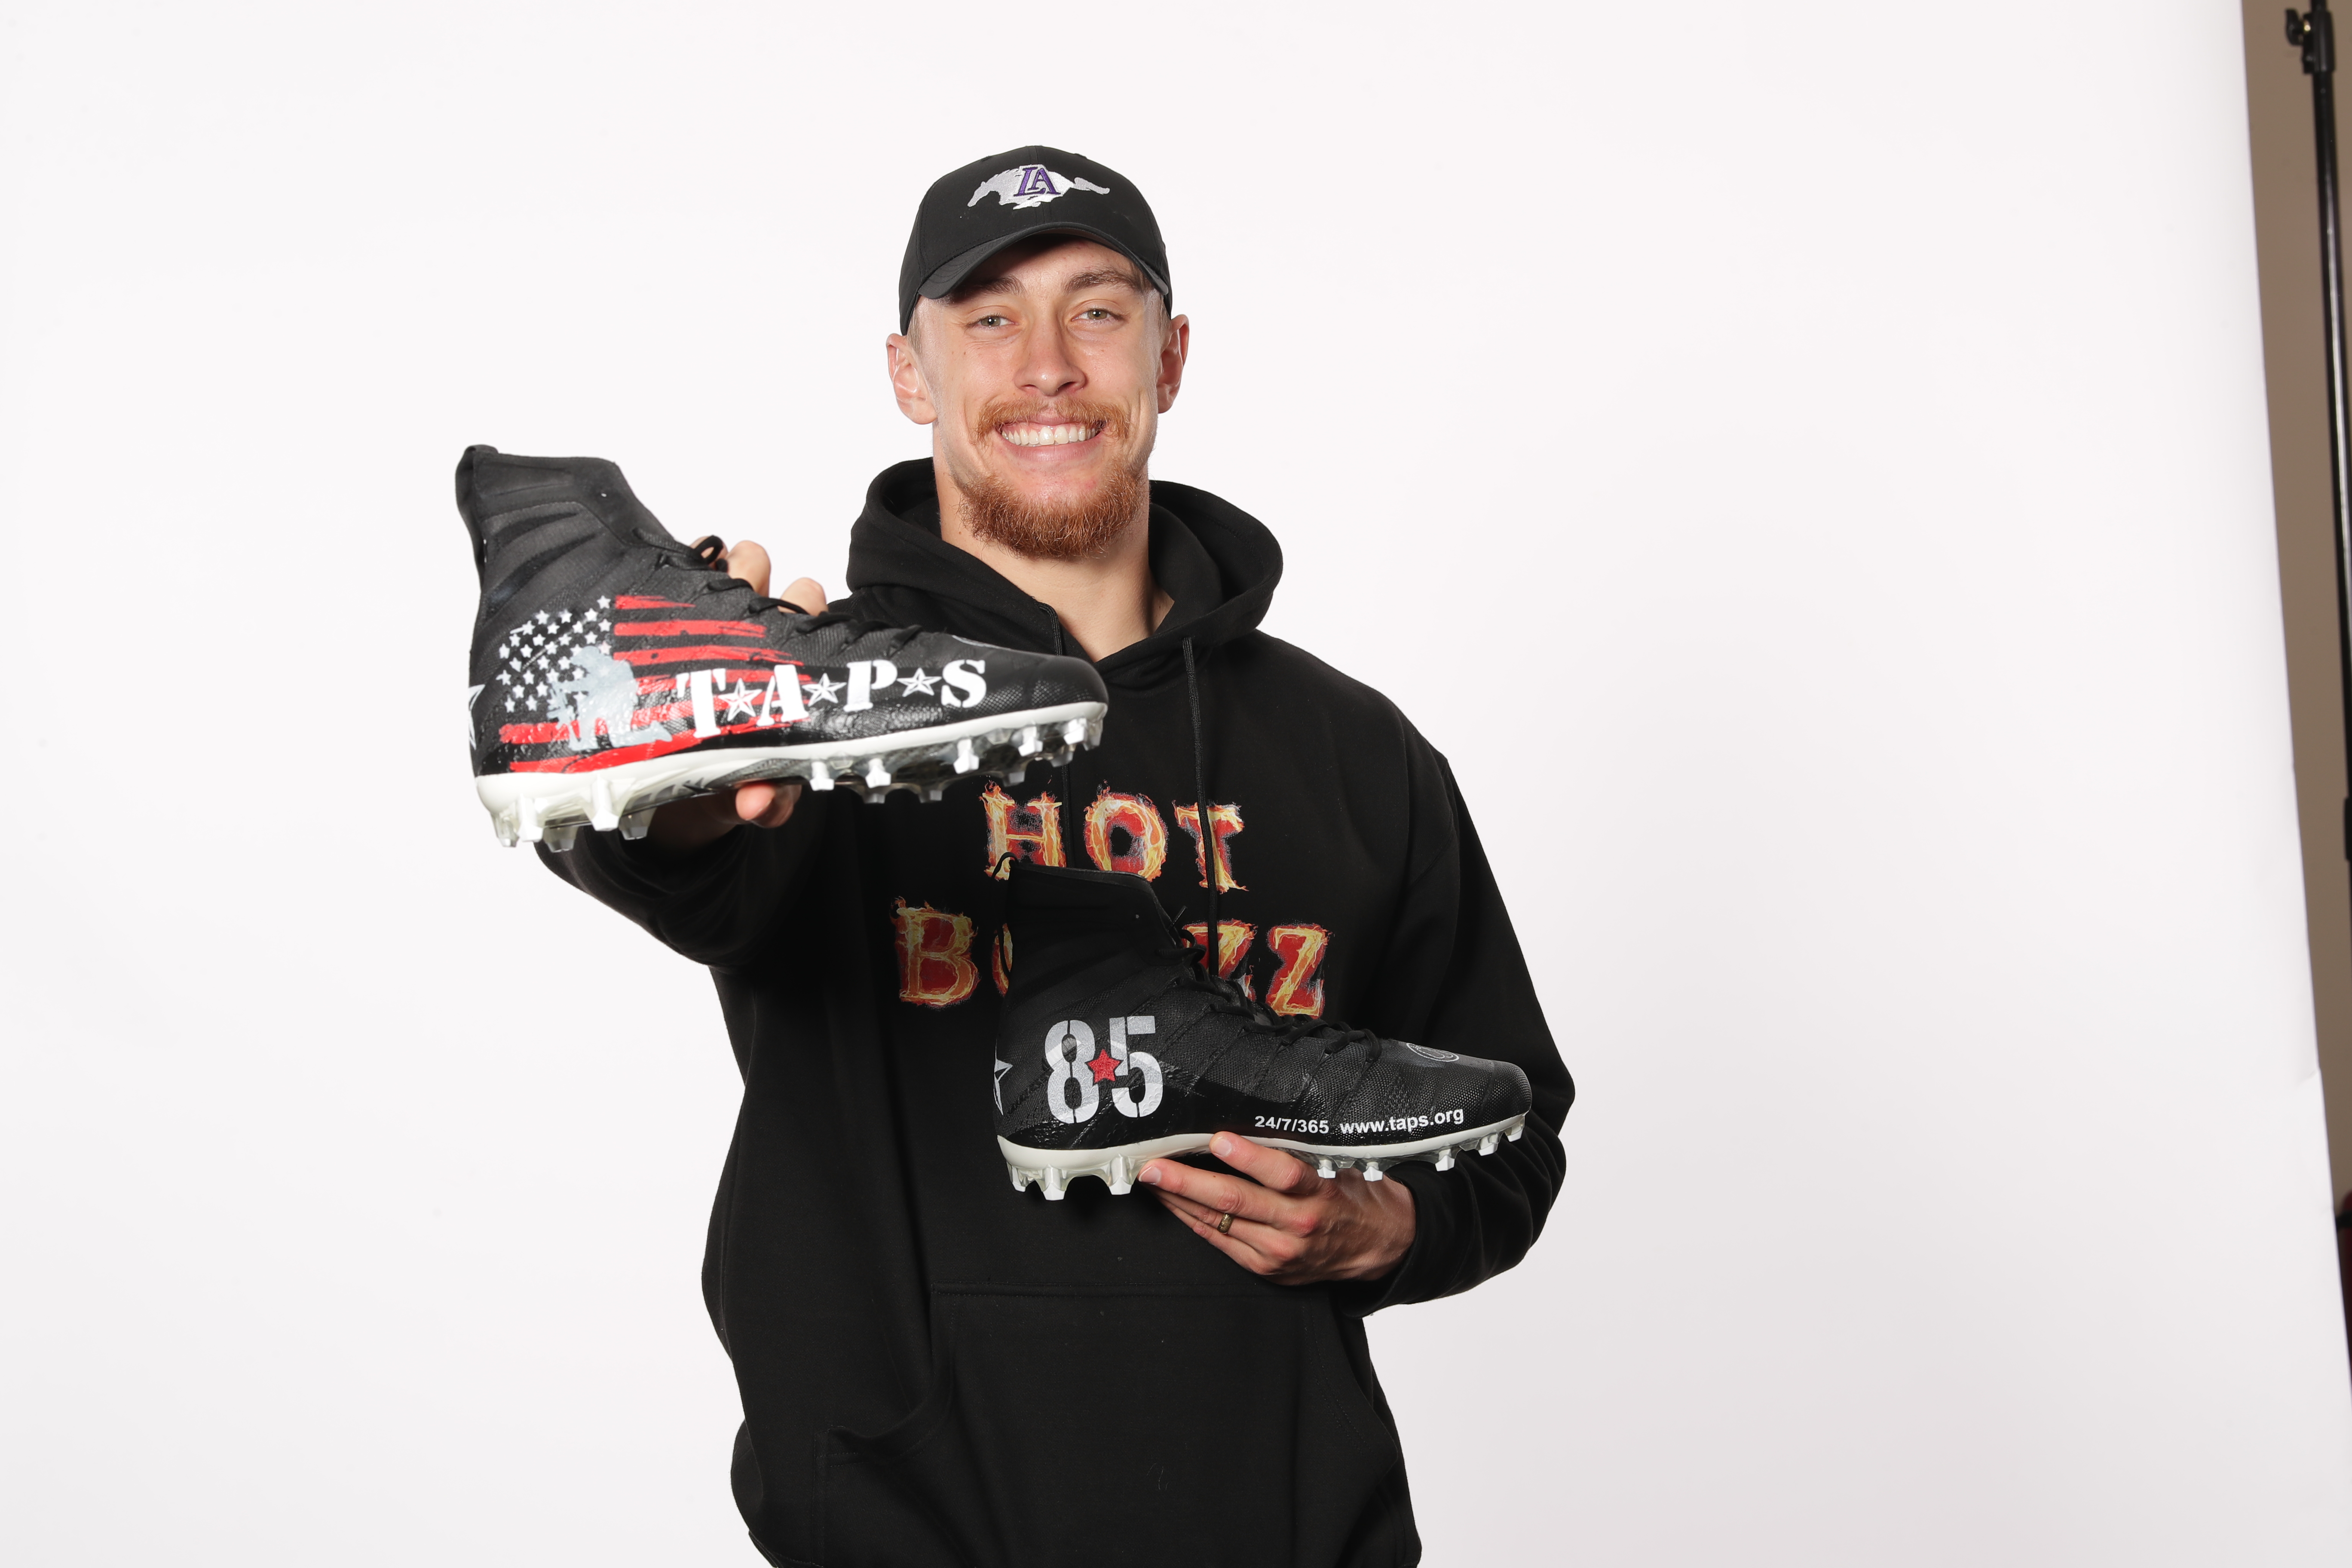 Fancy Feet: 49ers Promote Charitable Organizations with My Cause